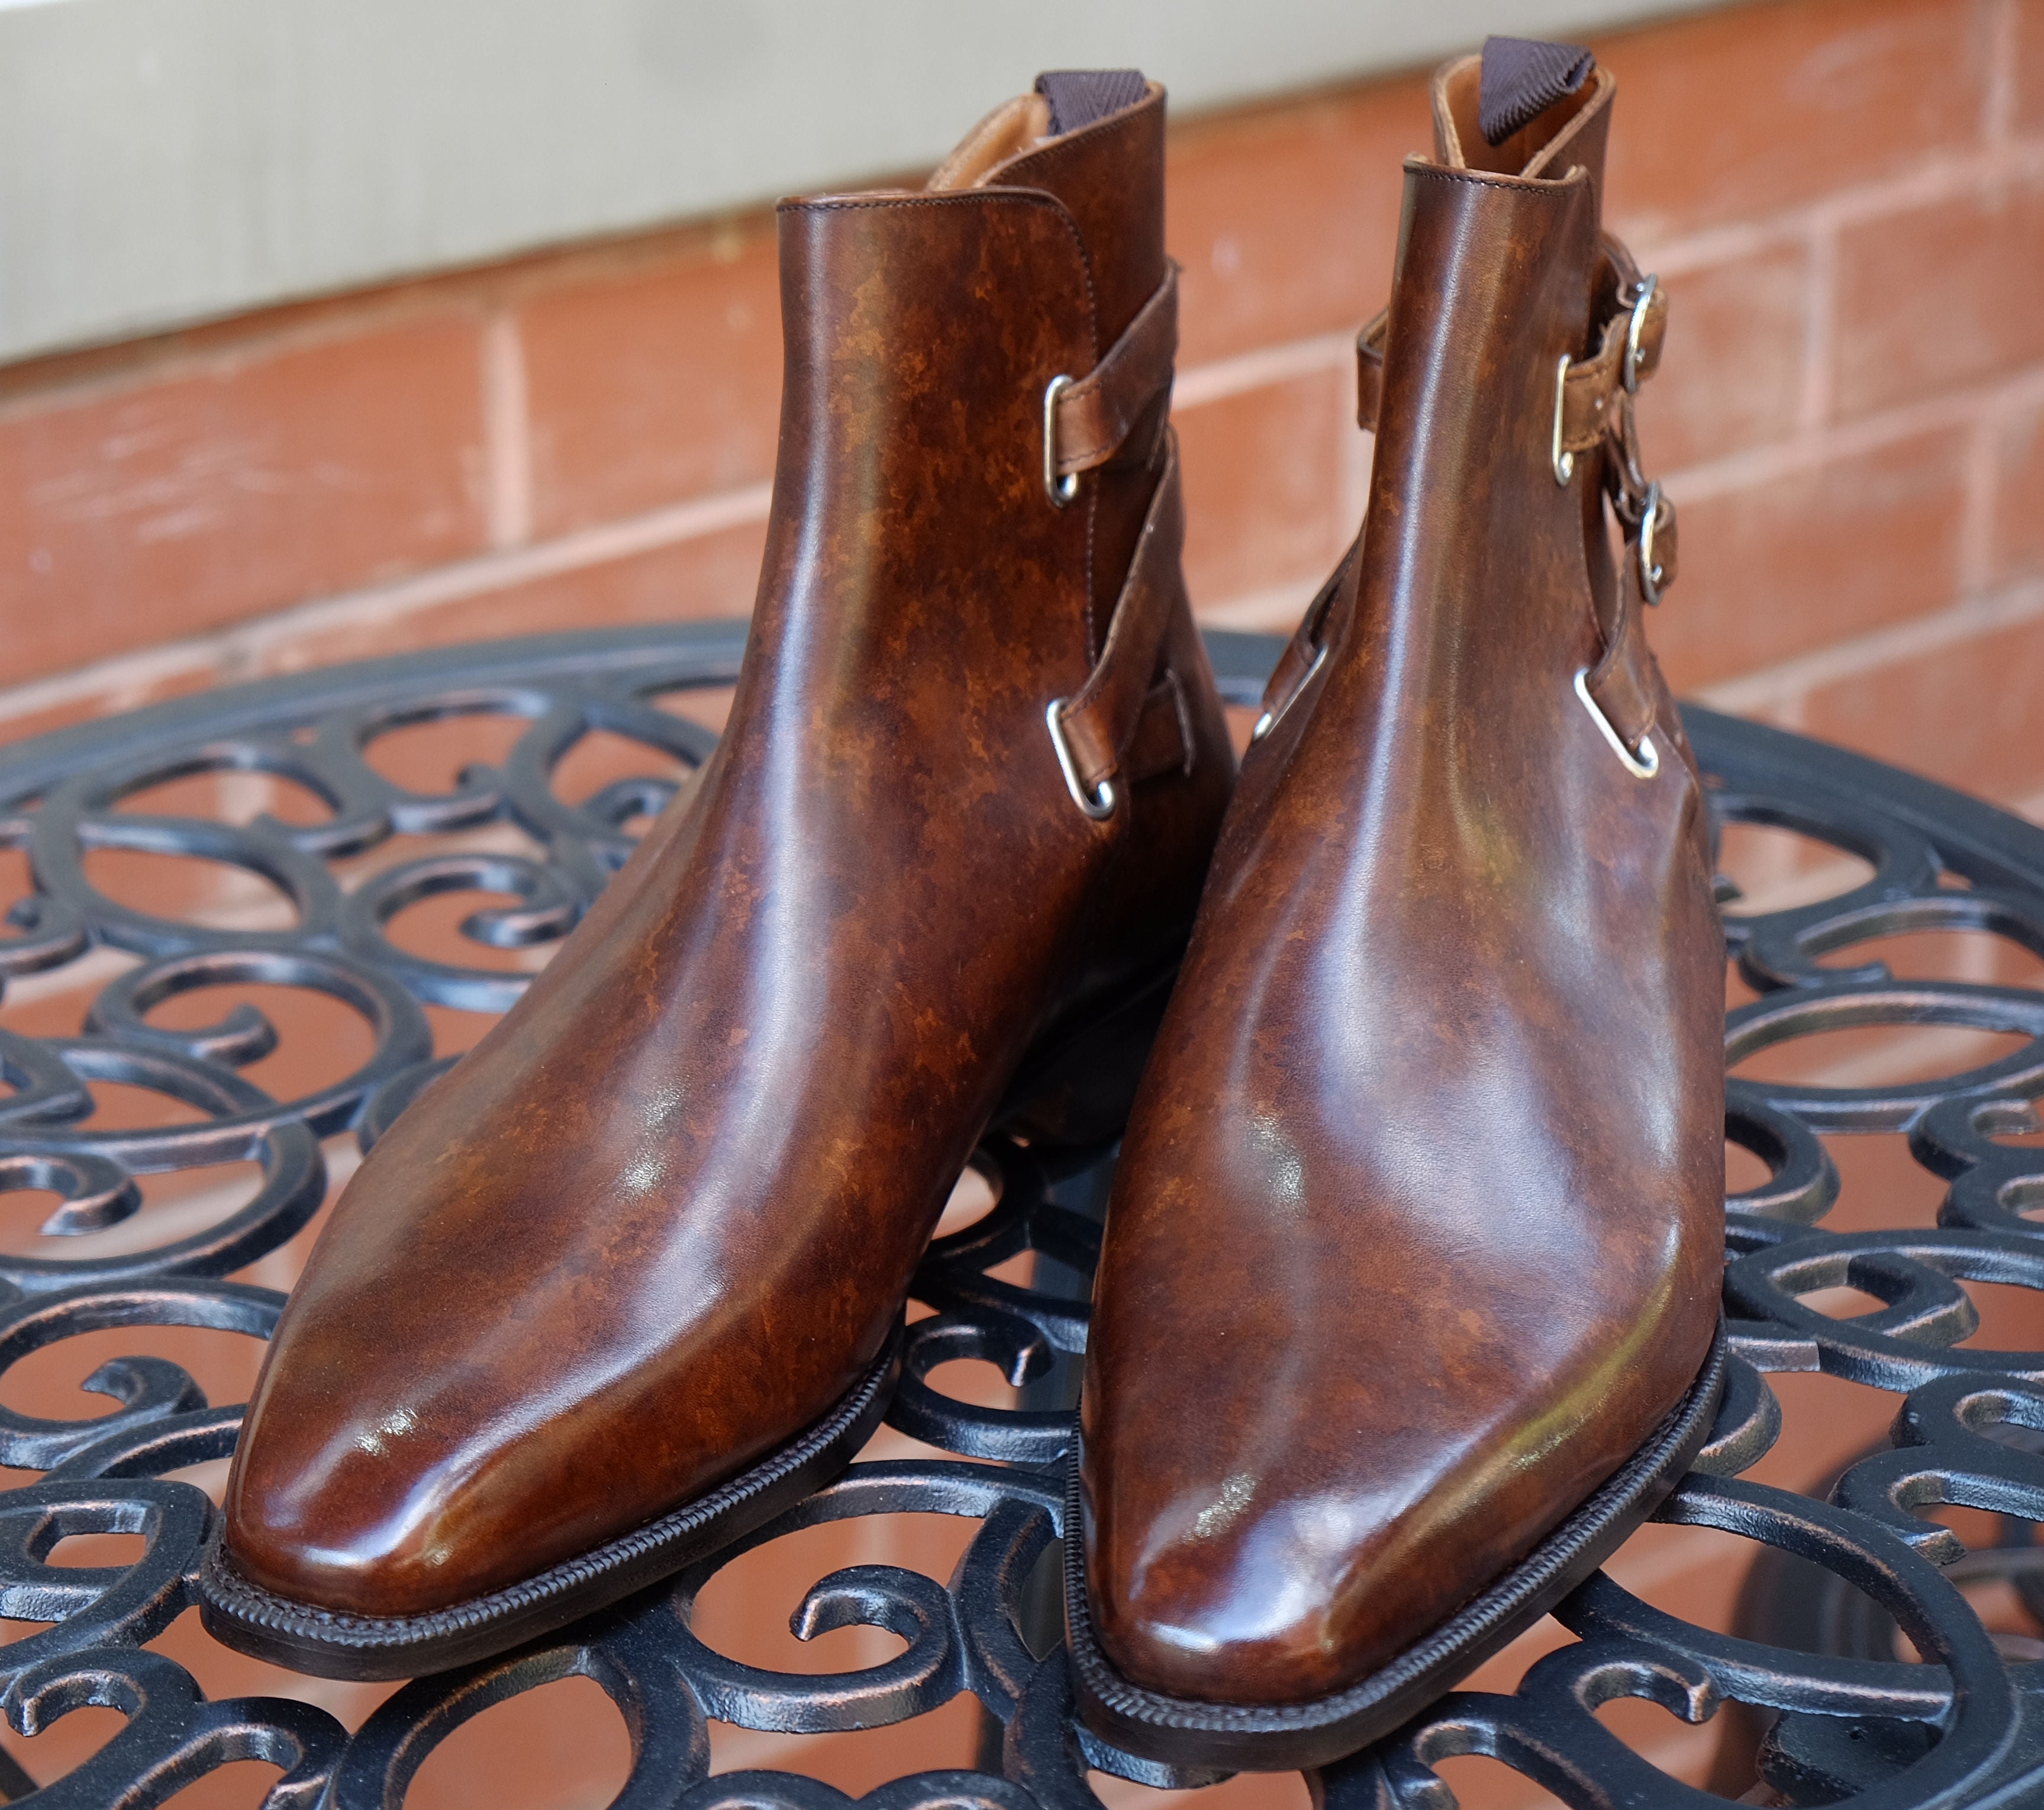 Genesee - MTO - Copper Marble Patina - LPB Last - Single Leather Sole